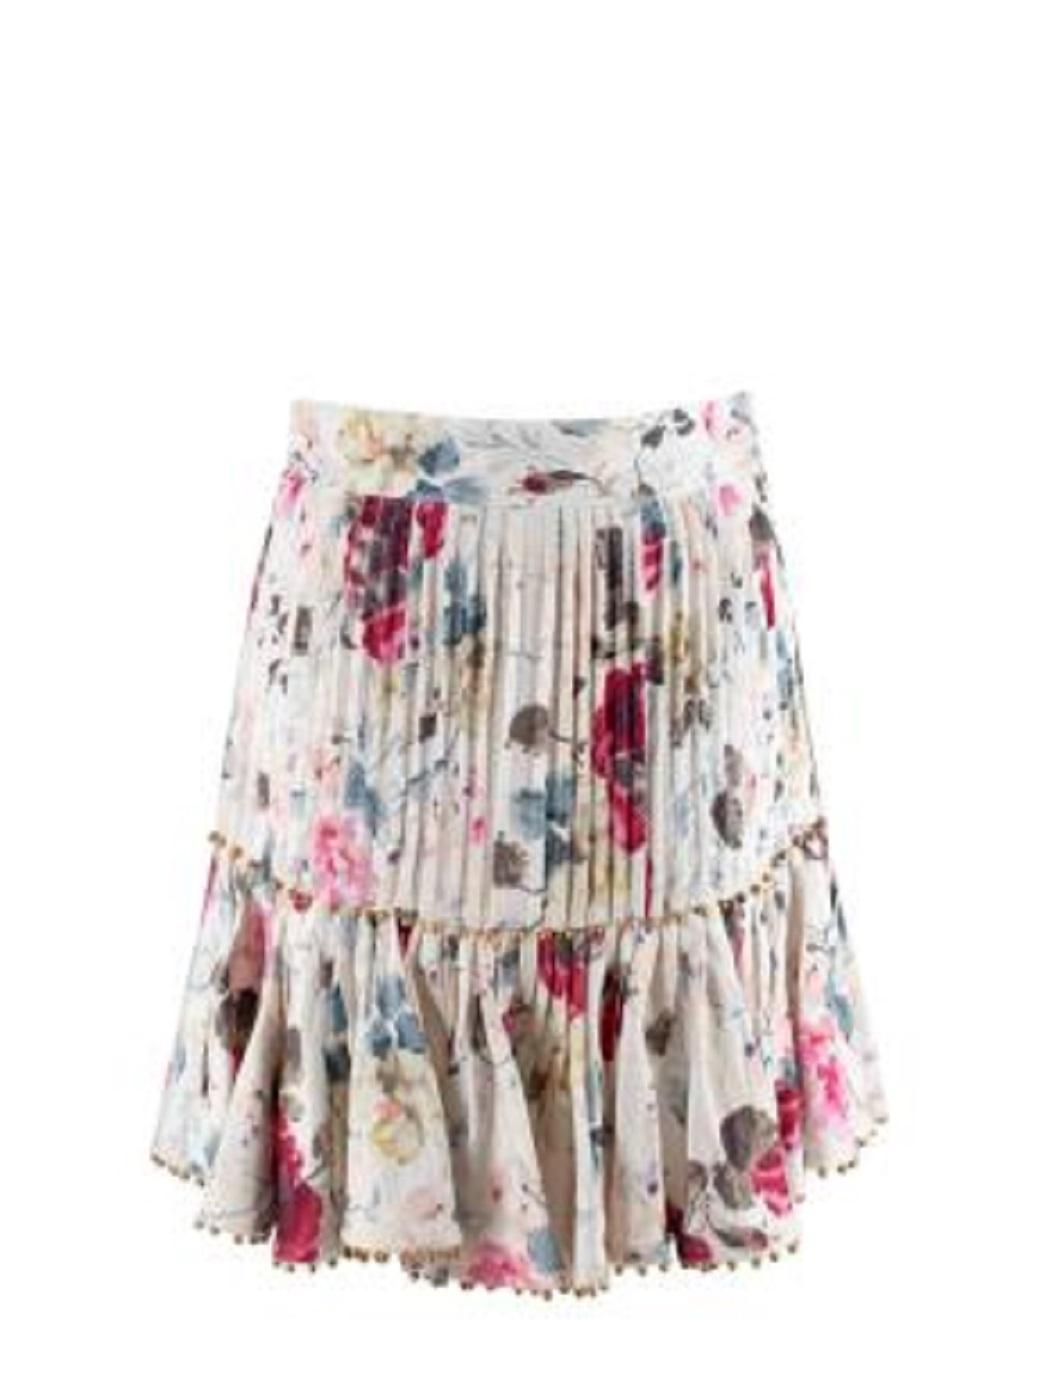 Zimmermann Floral Pin-Tuck Skirt

- Pink based floral print on an ivory base
- Pink tucking, with gold-tone bead embellishment
- Ruffled hem with bead
- Concealed zip back fastening 

Materials:
Shell: 100% Linen 
Lining: 100% Cotton 

Made in China